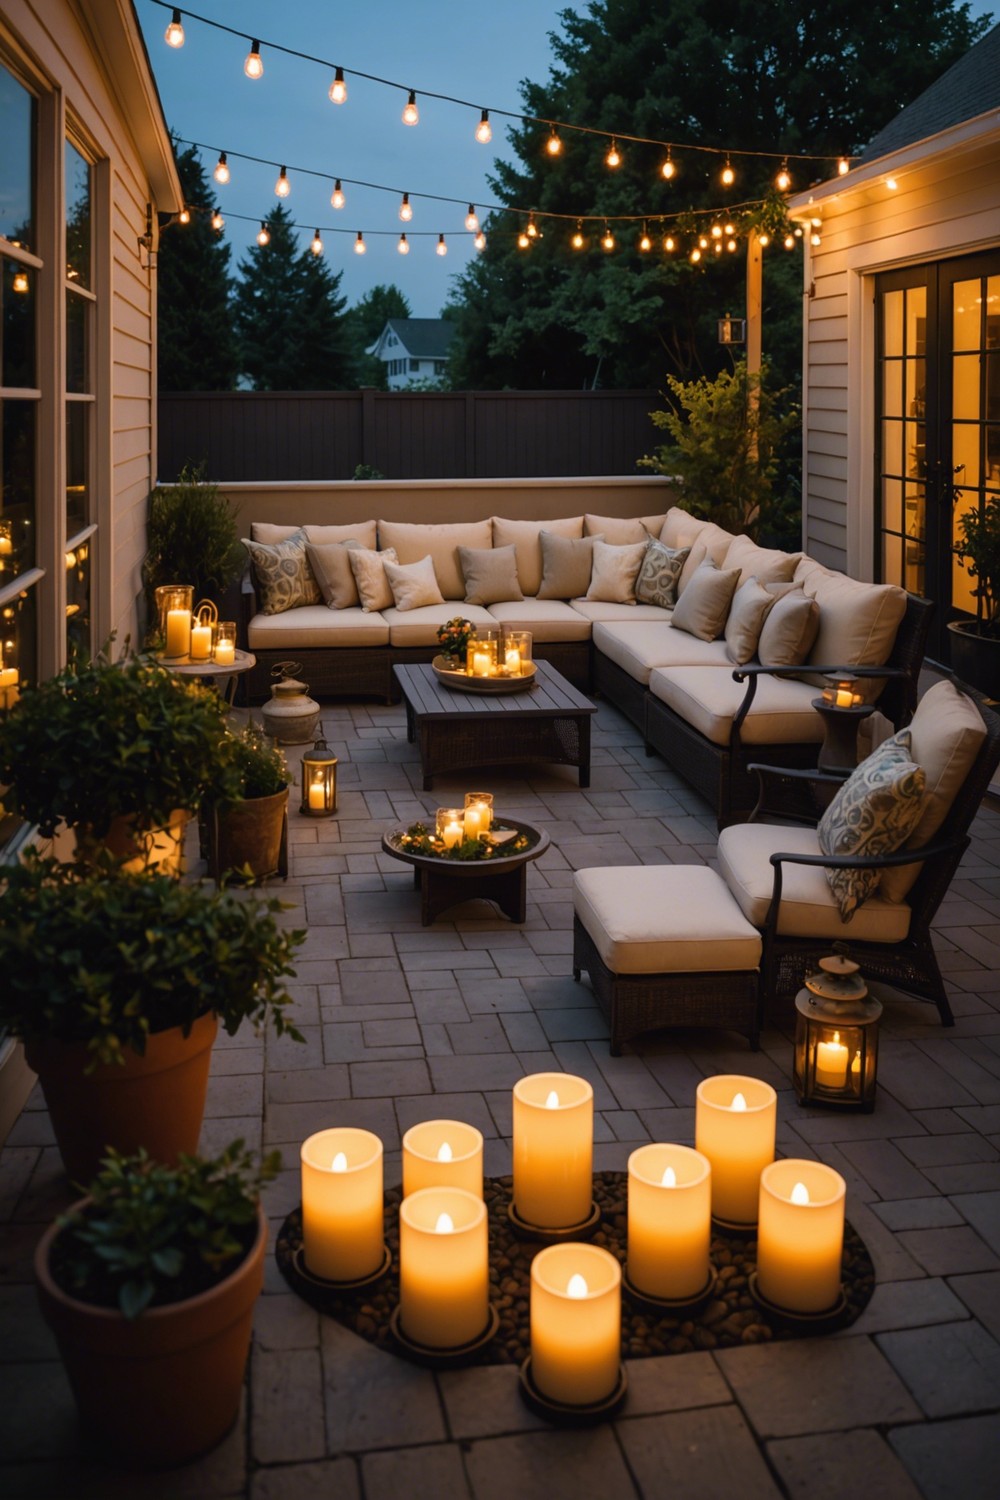 Candlelit Ambiance for a Warm Glow